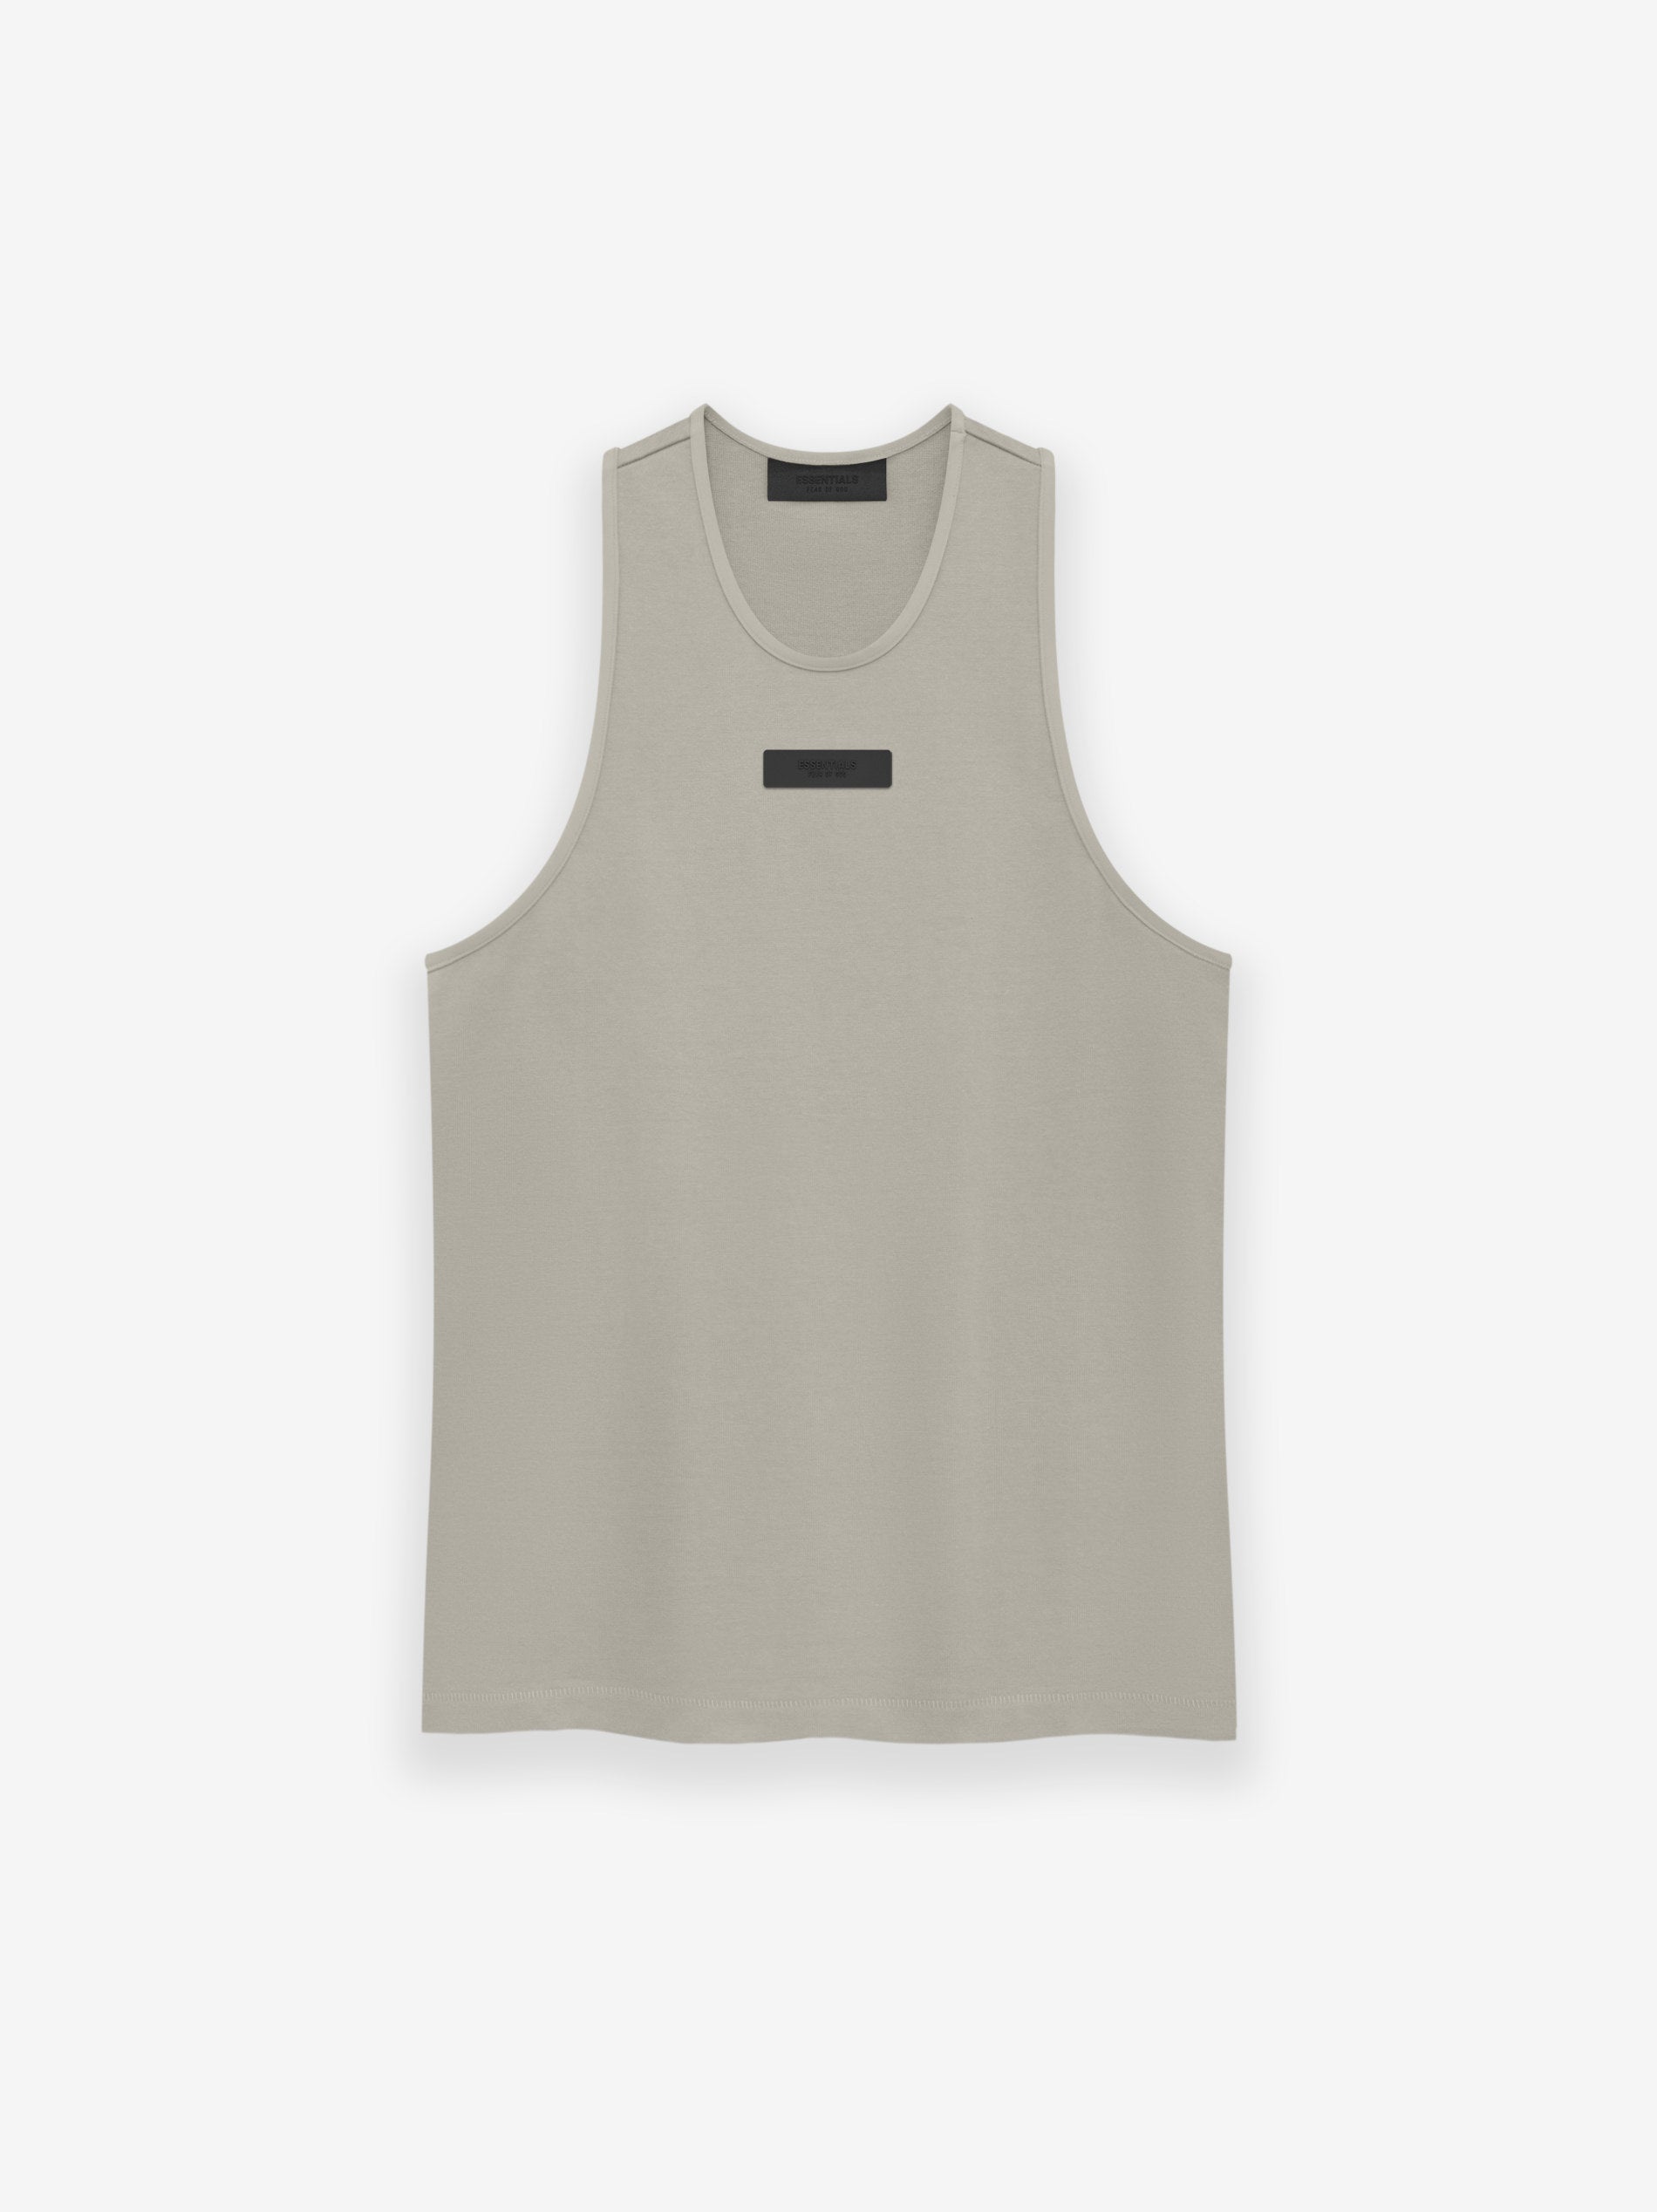 Essential Dropped Armhole Tank Top for Men